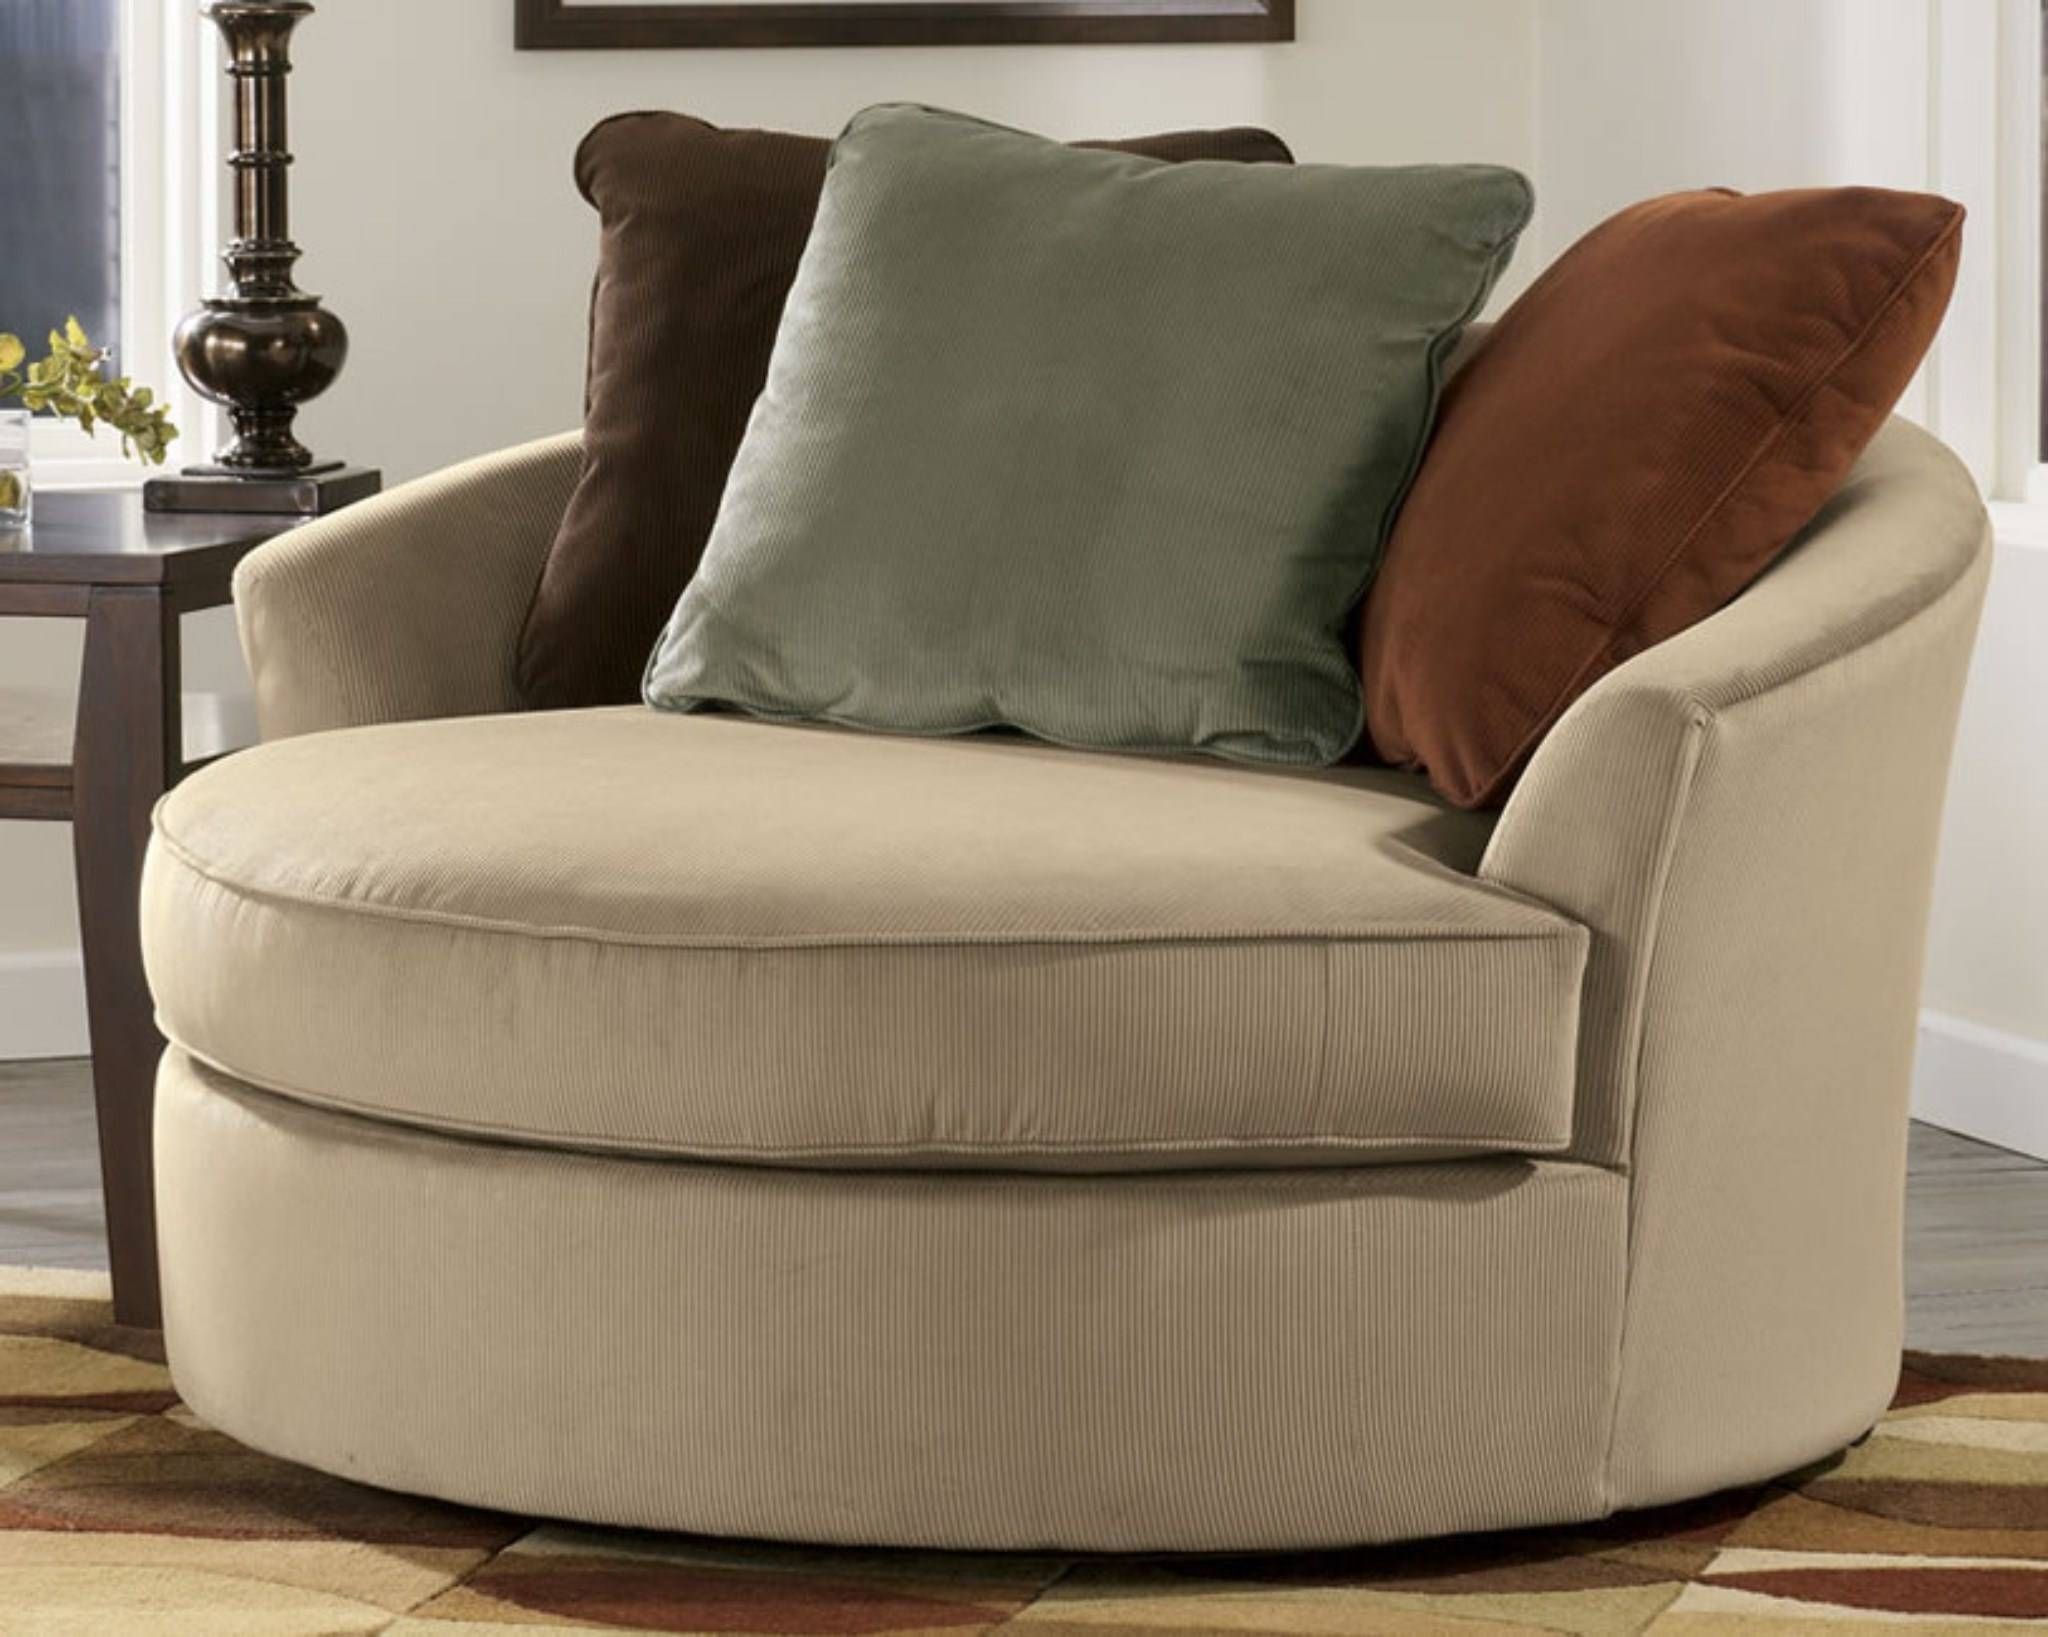 Round Sofa Chair Design – Home Interior And Furniture Centre Regarding Round Sofa Chairs (View 10 of 15)